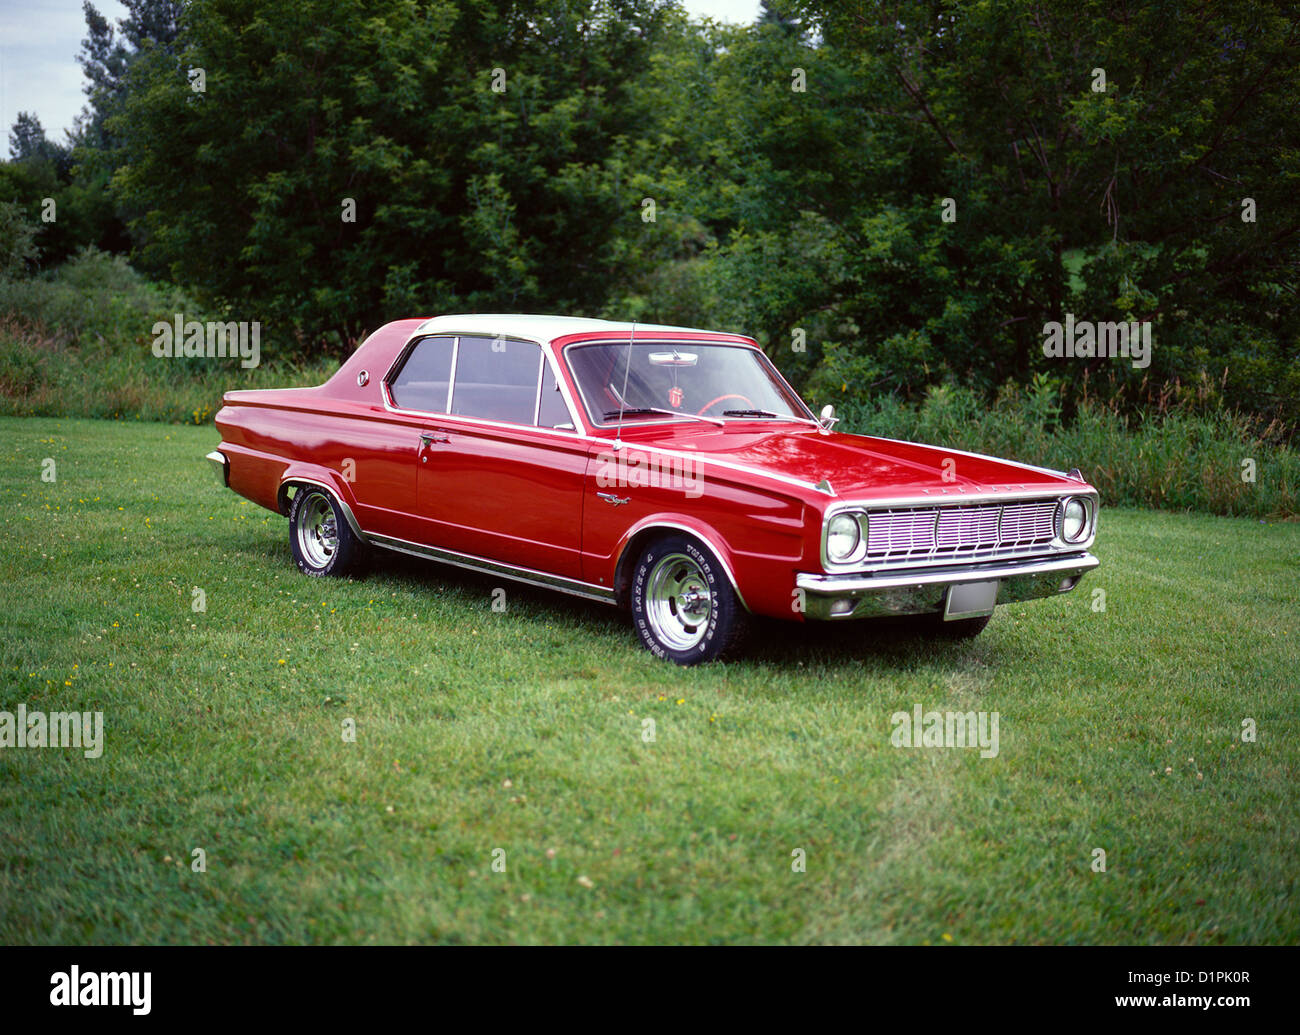 1966 Plymouth Valiant Banque D'Images